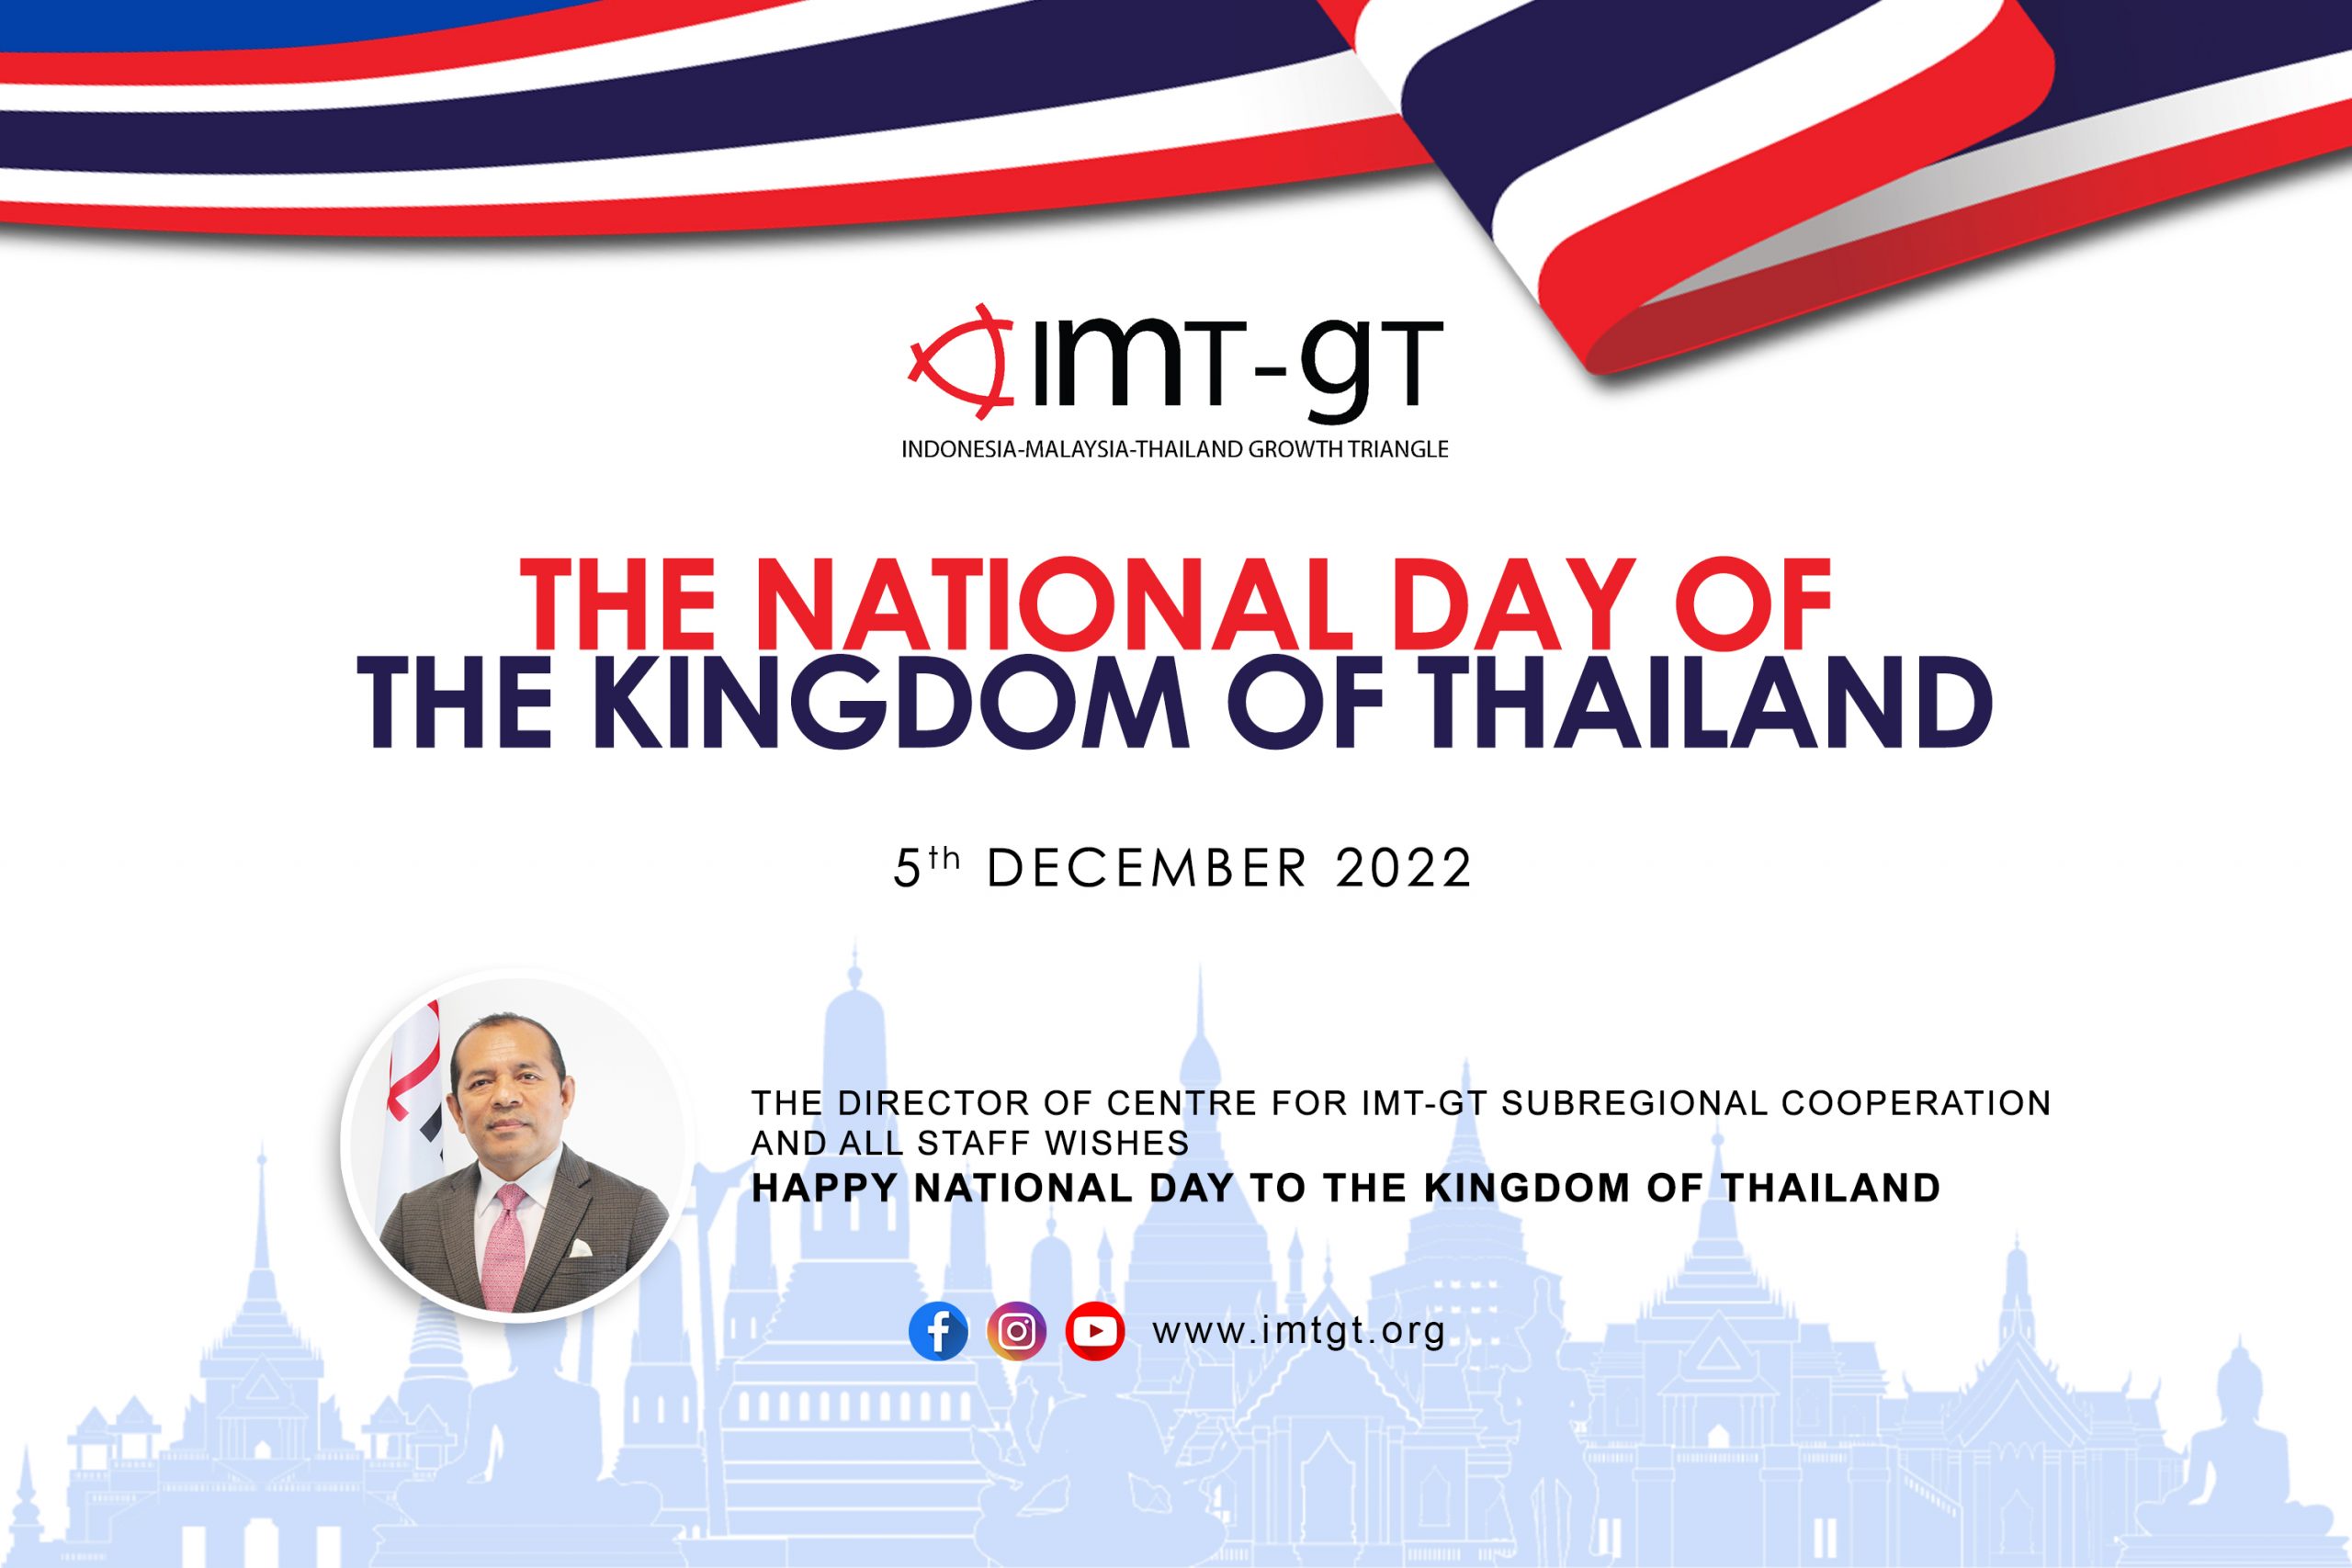 HAPPY NATIONAL DAY TO THE KINGDOM OF THAILAND